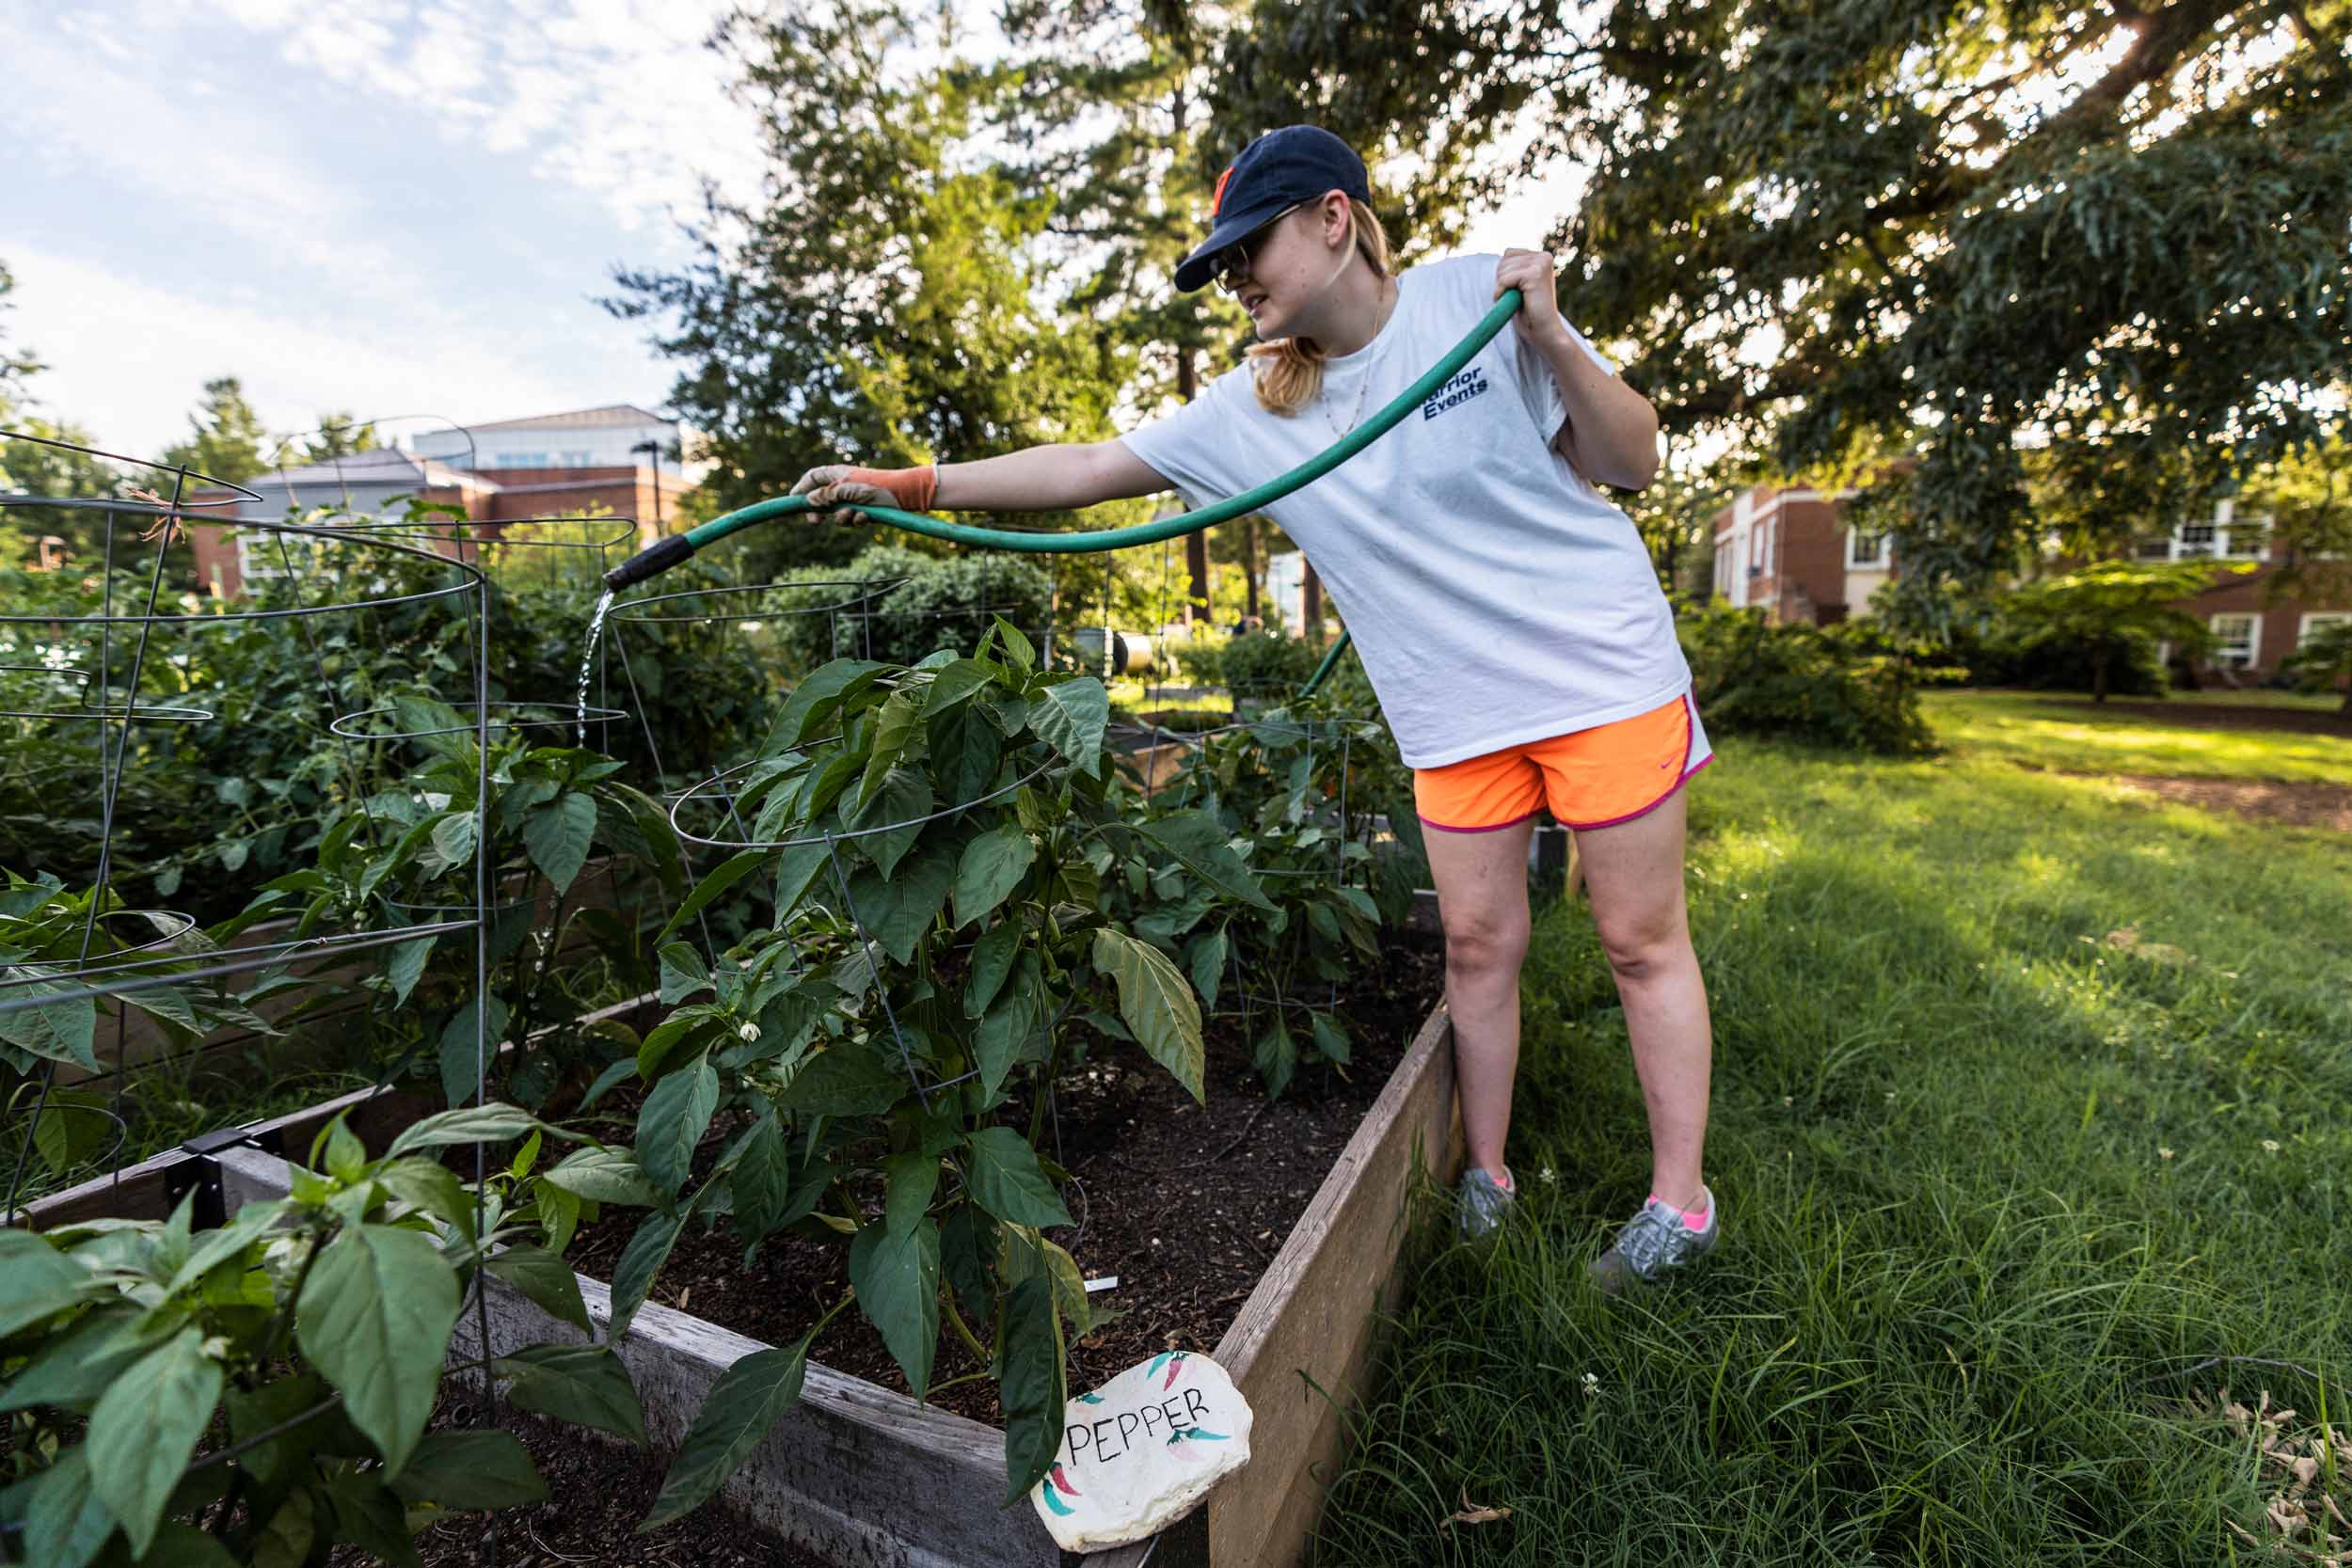 A woman with a garden hose waters a bed of pepper plants.